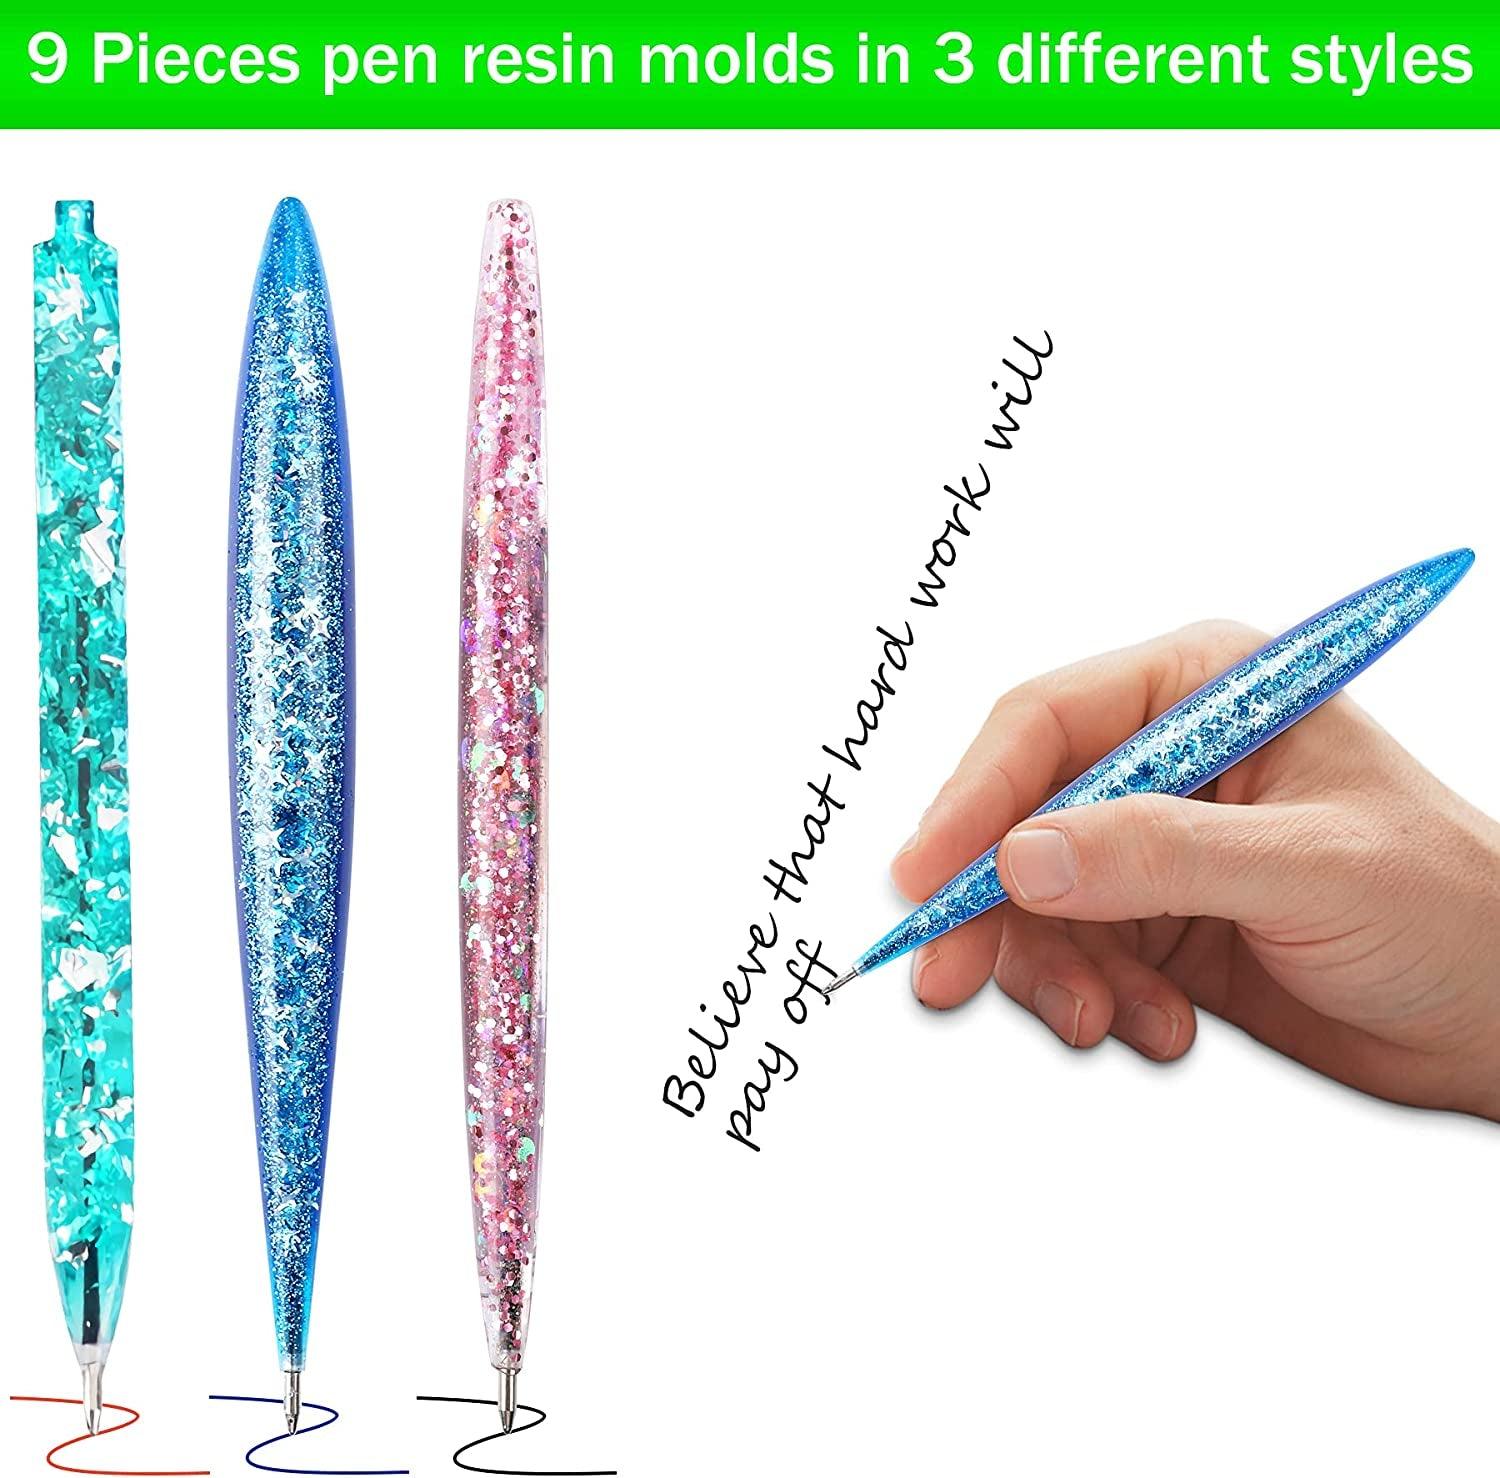 9 Pieces Pen Resin Mold, Epoxy Resin Molds with 75 Pieces Ink Pen Refills,Ballpoint Pen Silicone Molds Resin Casting Molds for DIY Resin Crafts Making - WoodArtSupply